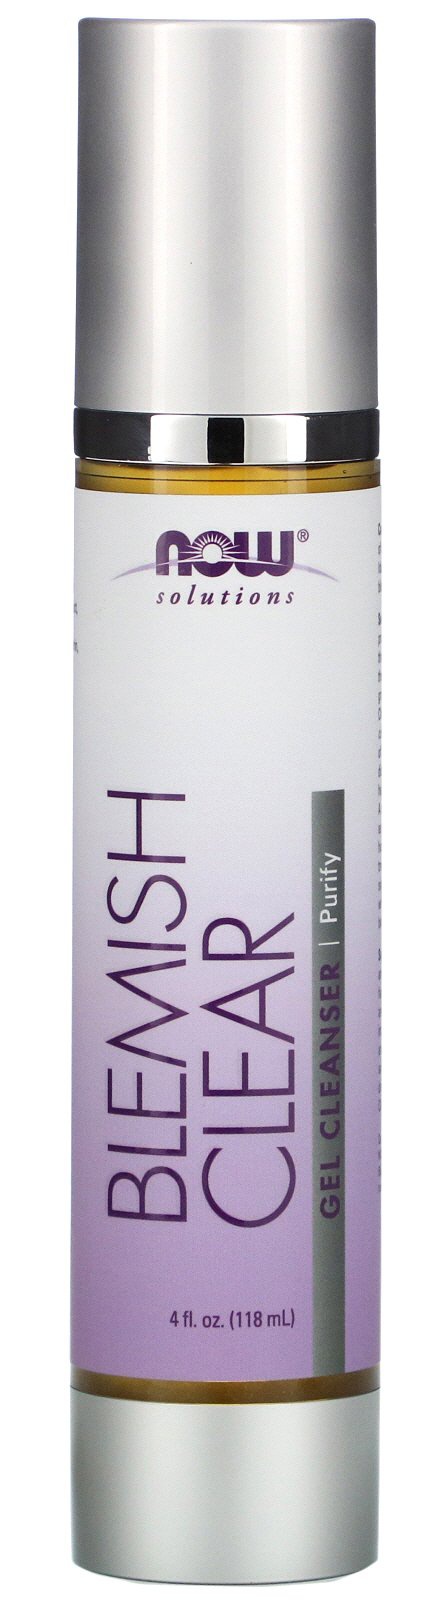 Now Foods Solutions Blemish Clear Gel Cleanser